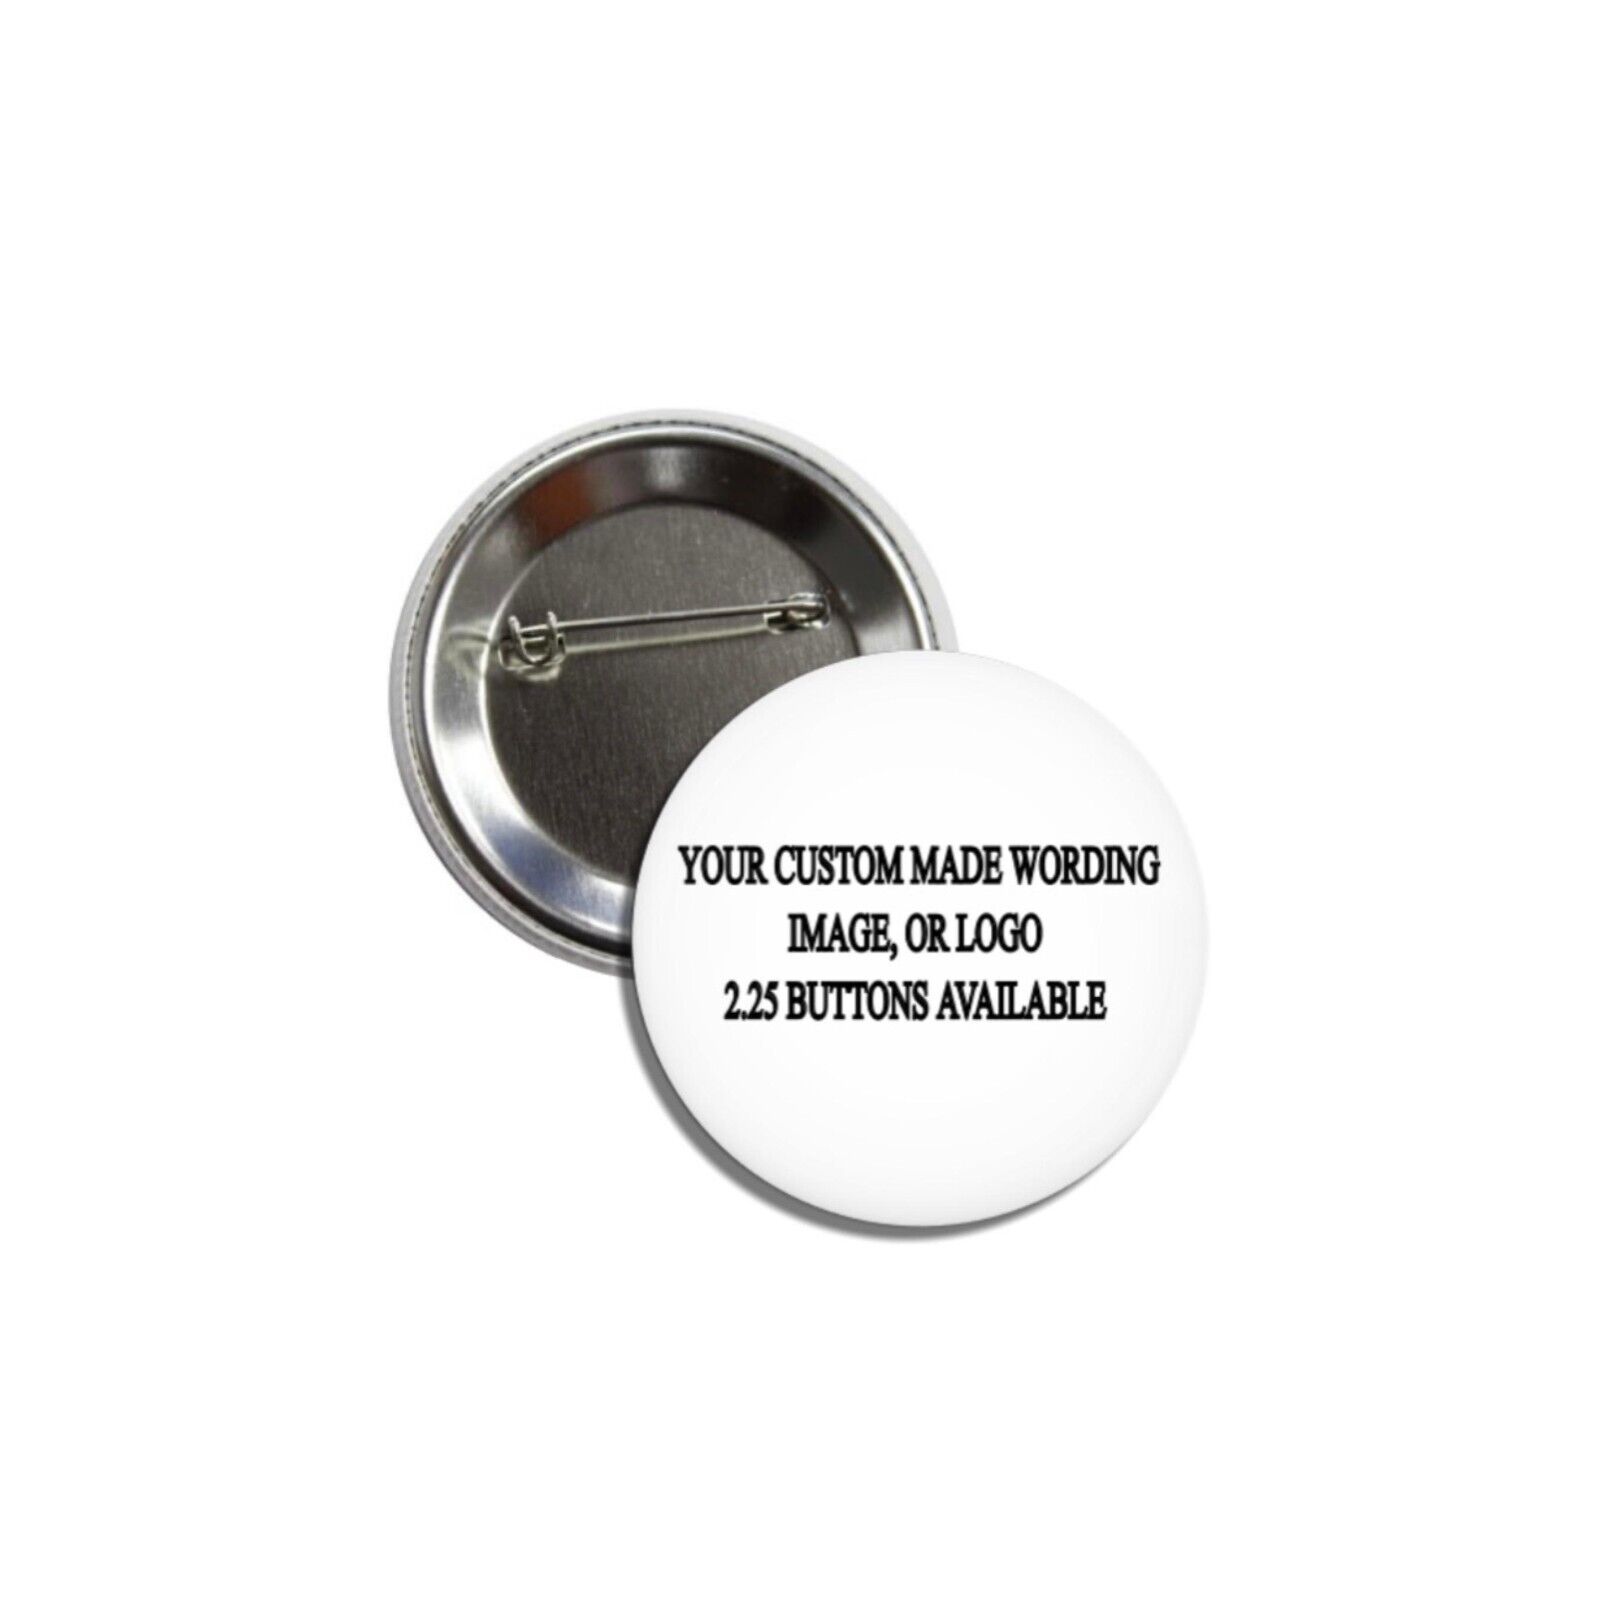 CUSTOM PINBACK BUTTONS any photos designs badge pins personalized 2.25.